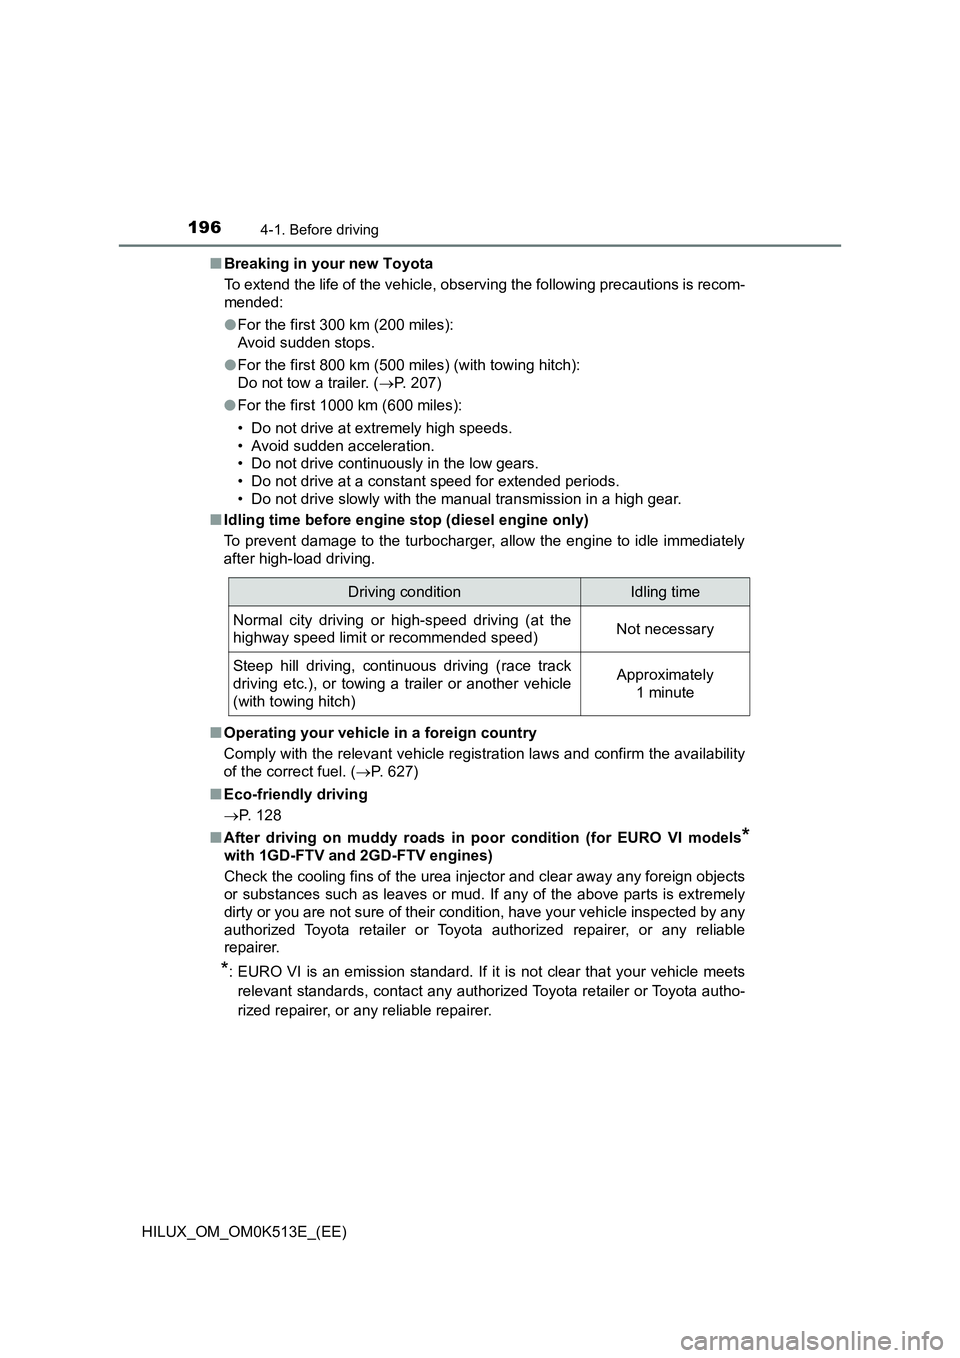 TOYOTA HILUX 2022  Owners Manual 1964-1. Before driving
HILUX_OM_OM0K513E_(EE) 
�Q Breaking in your new Toyota 
To extend the life of the vehicle, observing the following precautions is recom- 
mended: 
�O For the first 300 km (200 m